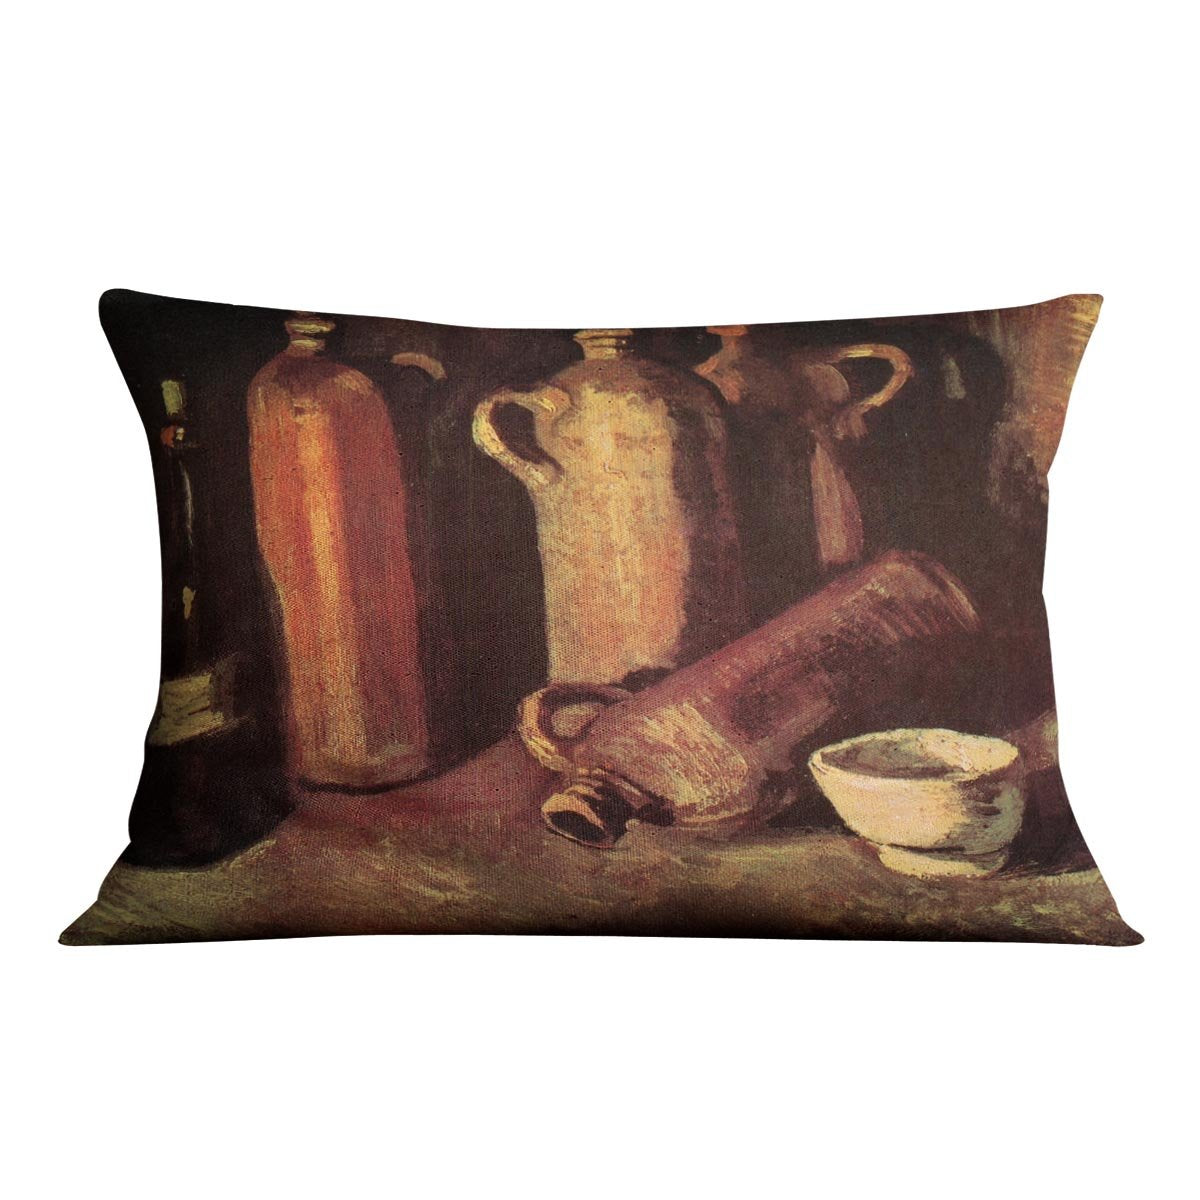 Still Life with Four Stone Bottles Flask and White Cup by Van Gogh Throw Pillow